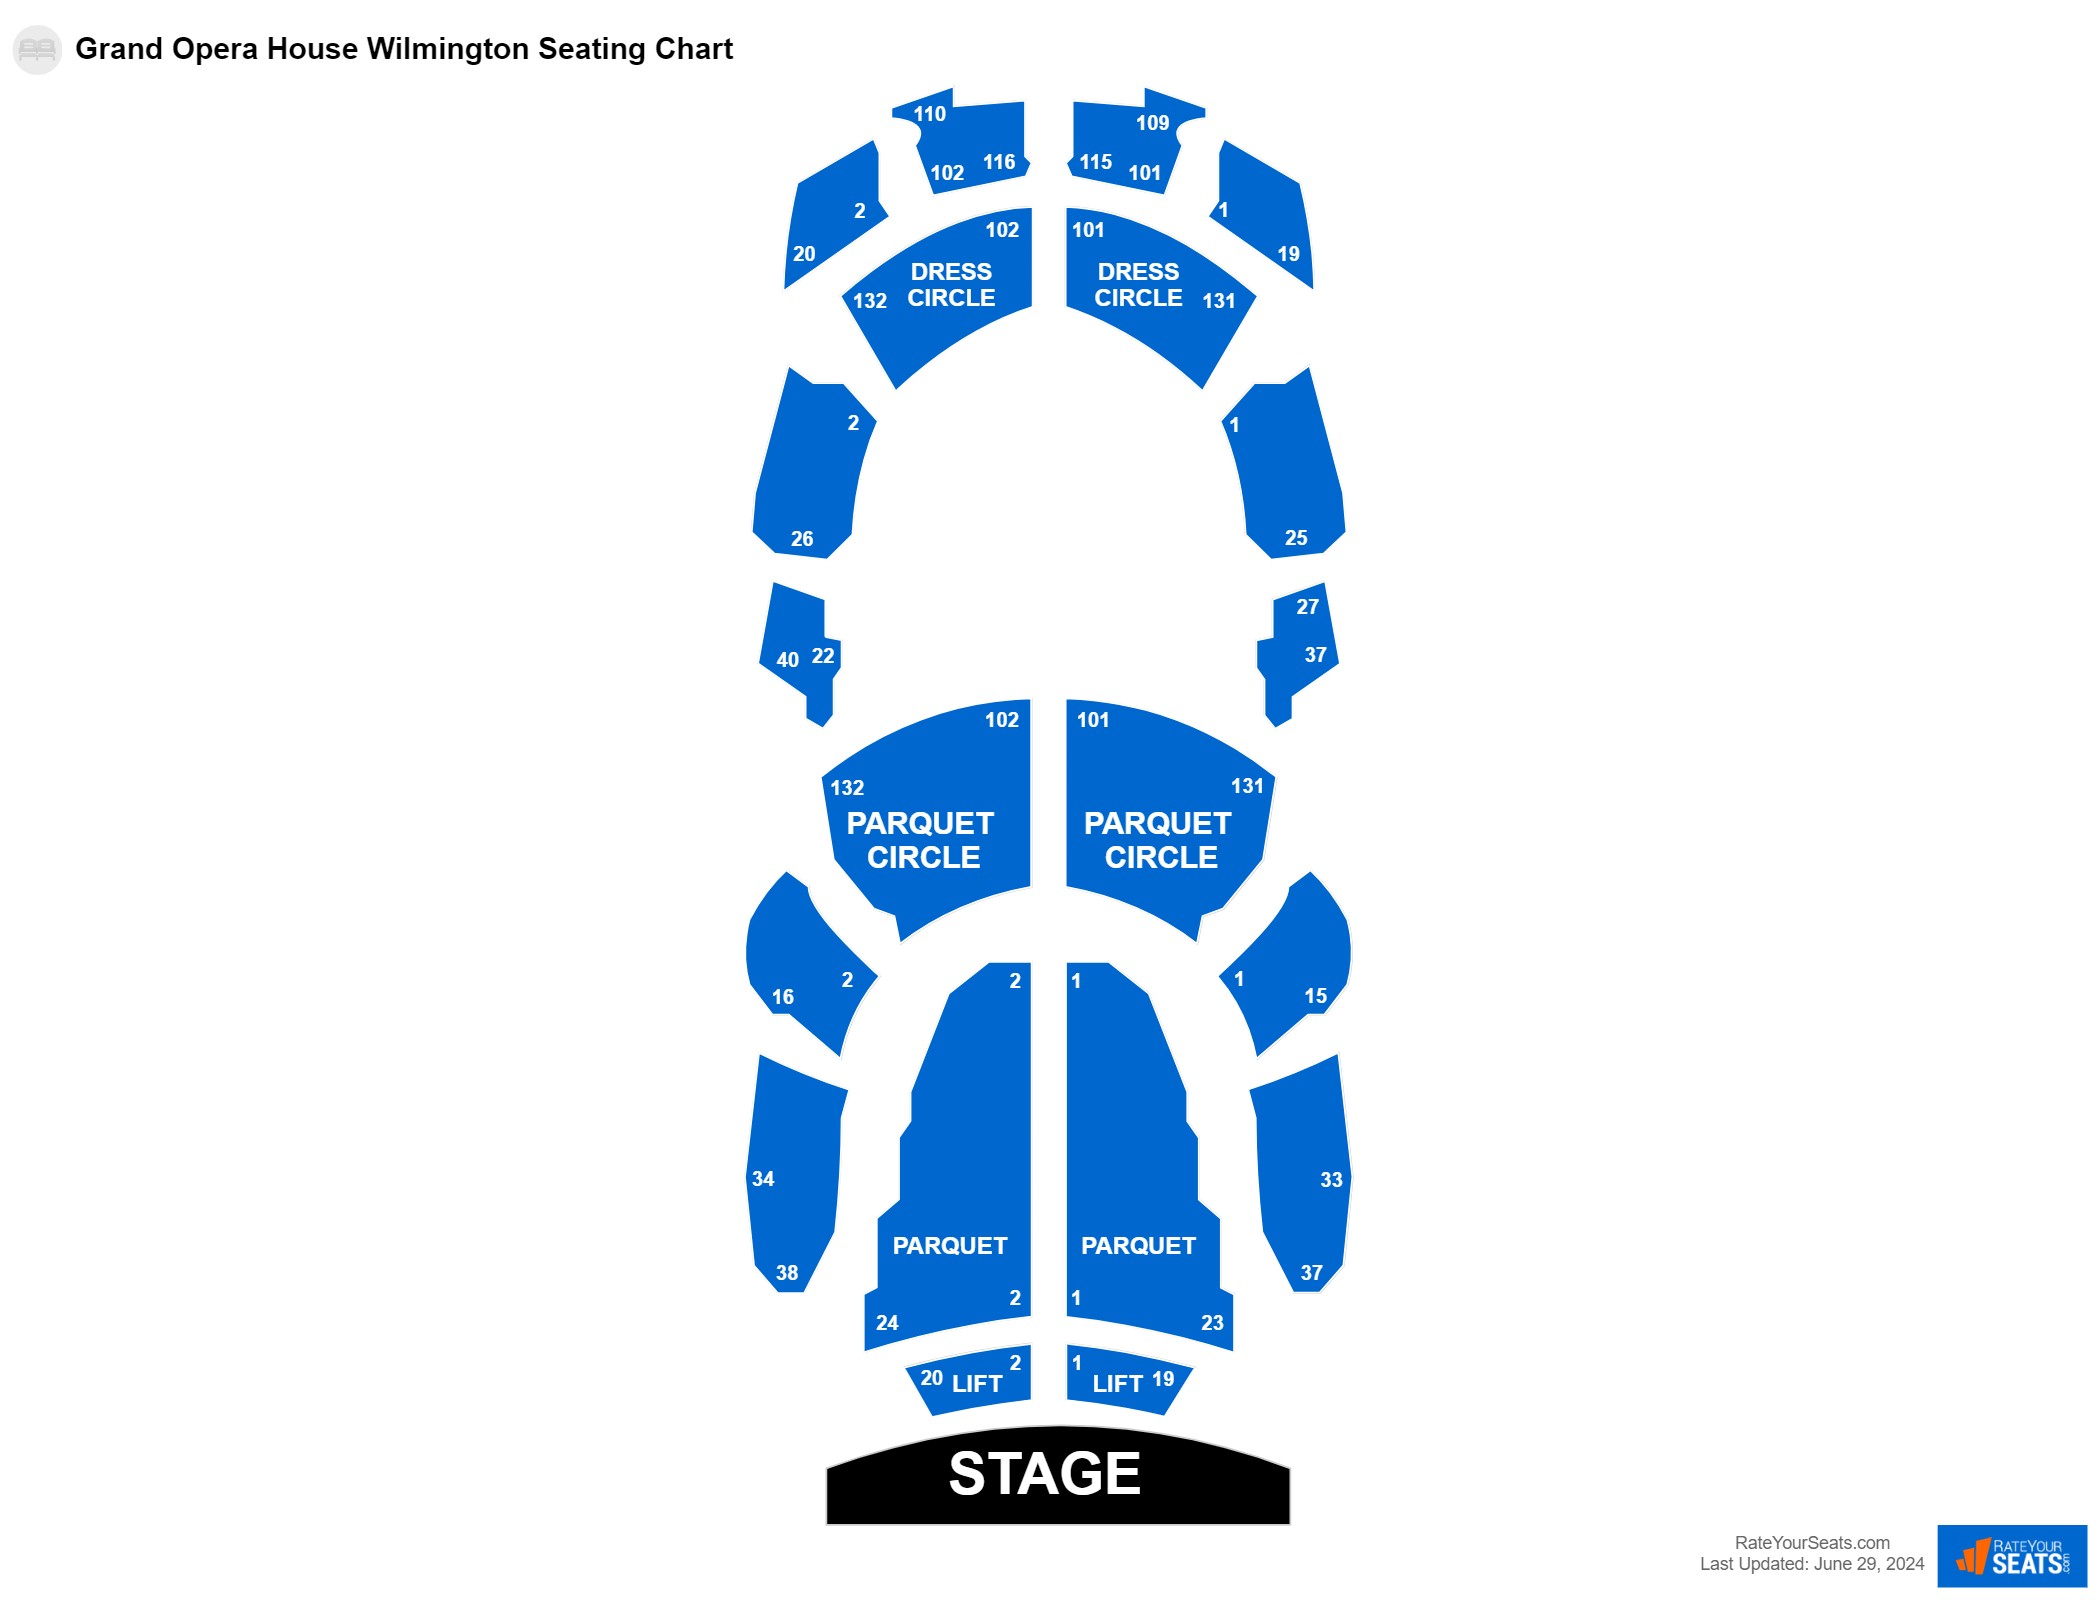 Comedy seating chart at Grand Opera House Wilmington